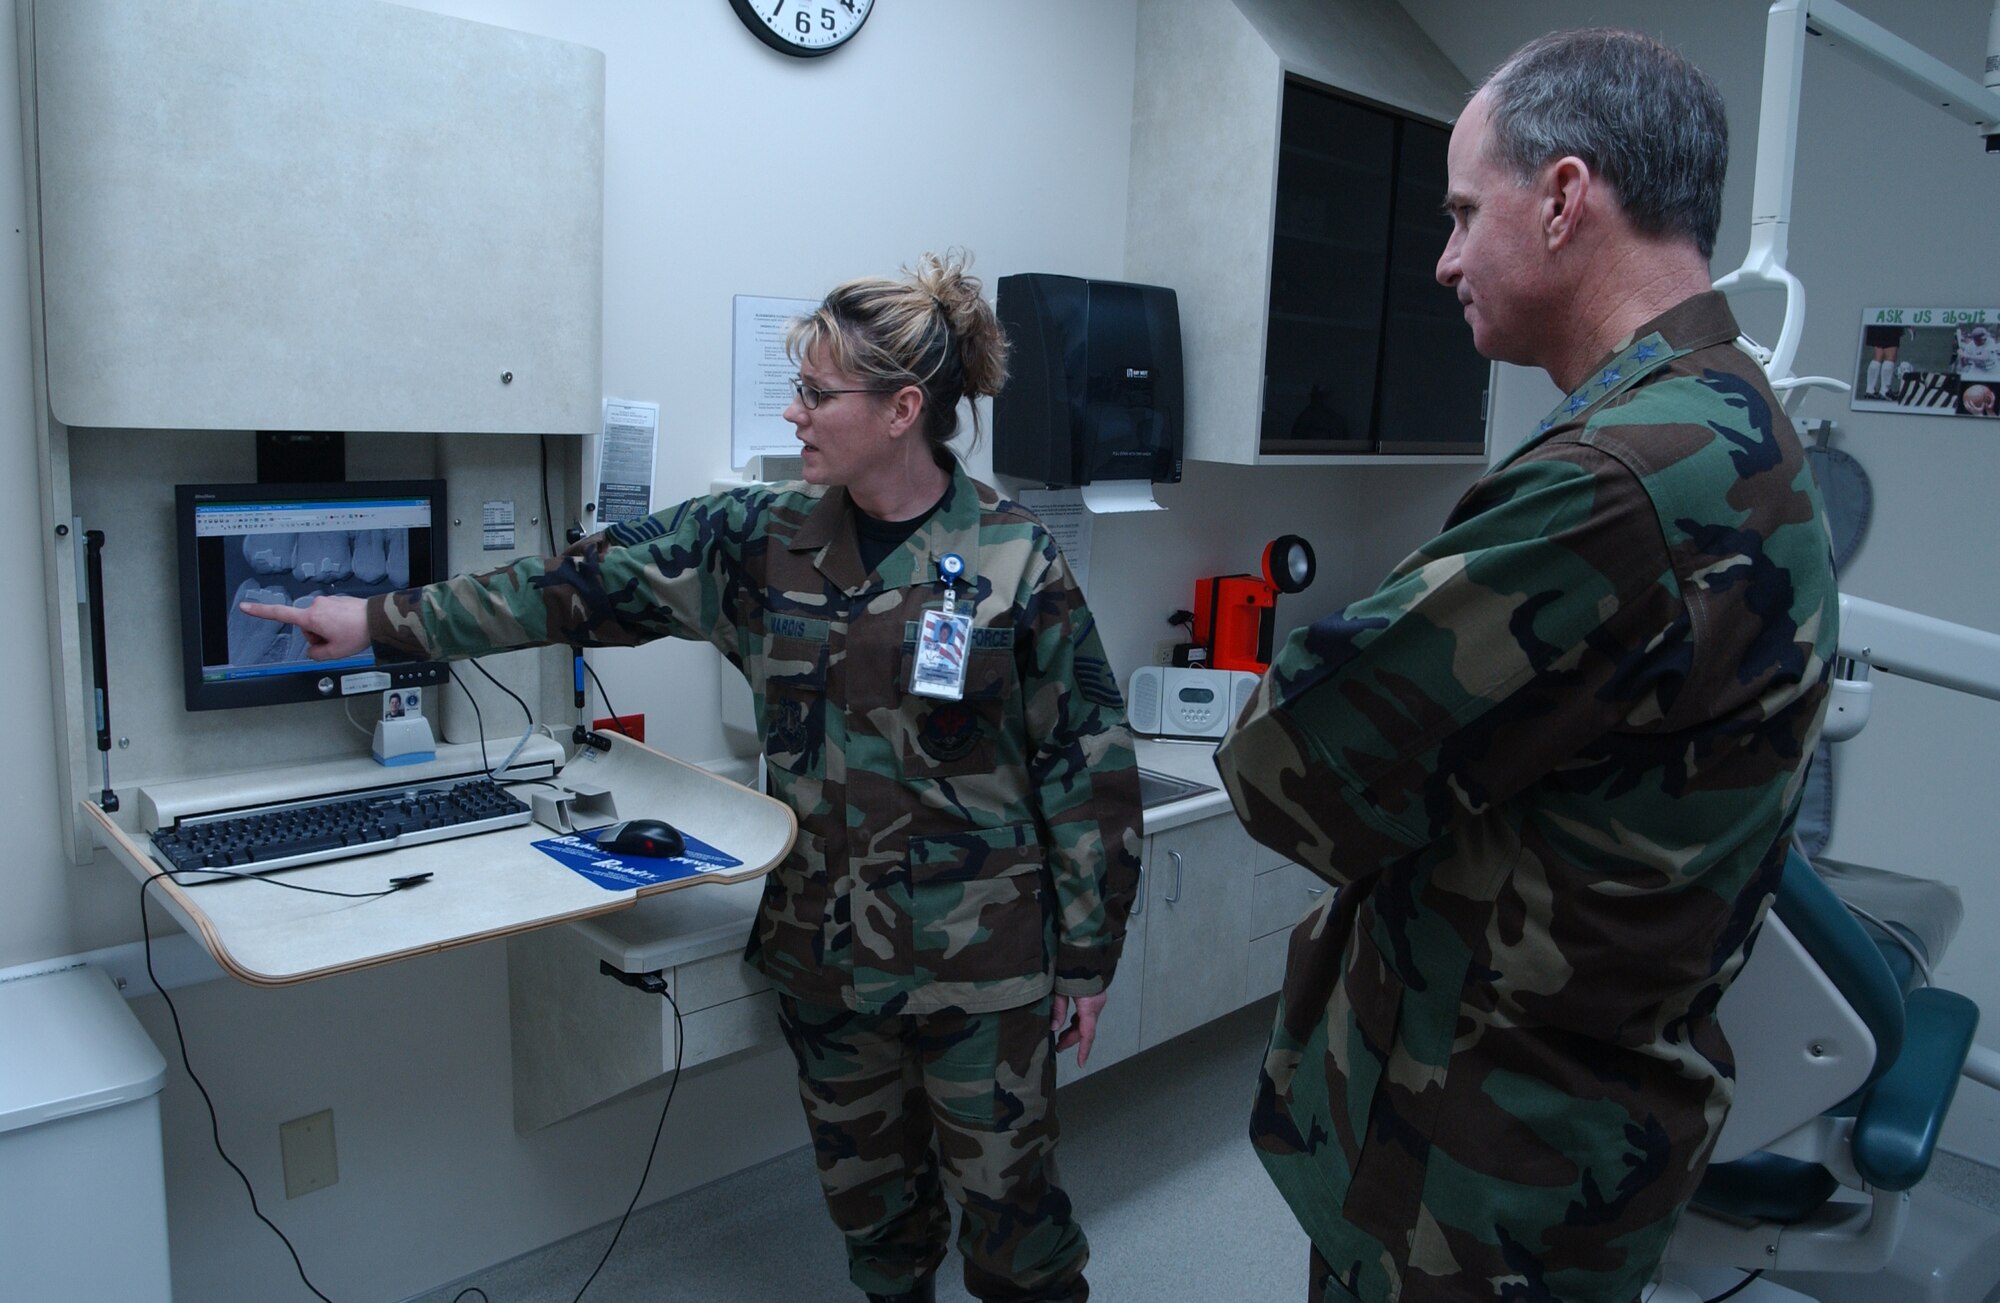 Master Sgt. Amy Mardis, Asistant NCOIC of the dental flight at the Malmstrom Clinic, briefs Gen. Kevin Chilton, Air Force Space Command commander, on the digital dental radiology being used in the clinic during his orientation visit to Malmstrom Jan. 24. The technology allows the dentist to review the same x-ray in different settings to better diagnose dental disease.